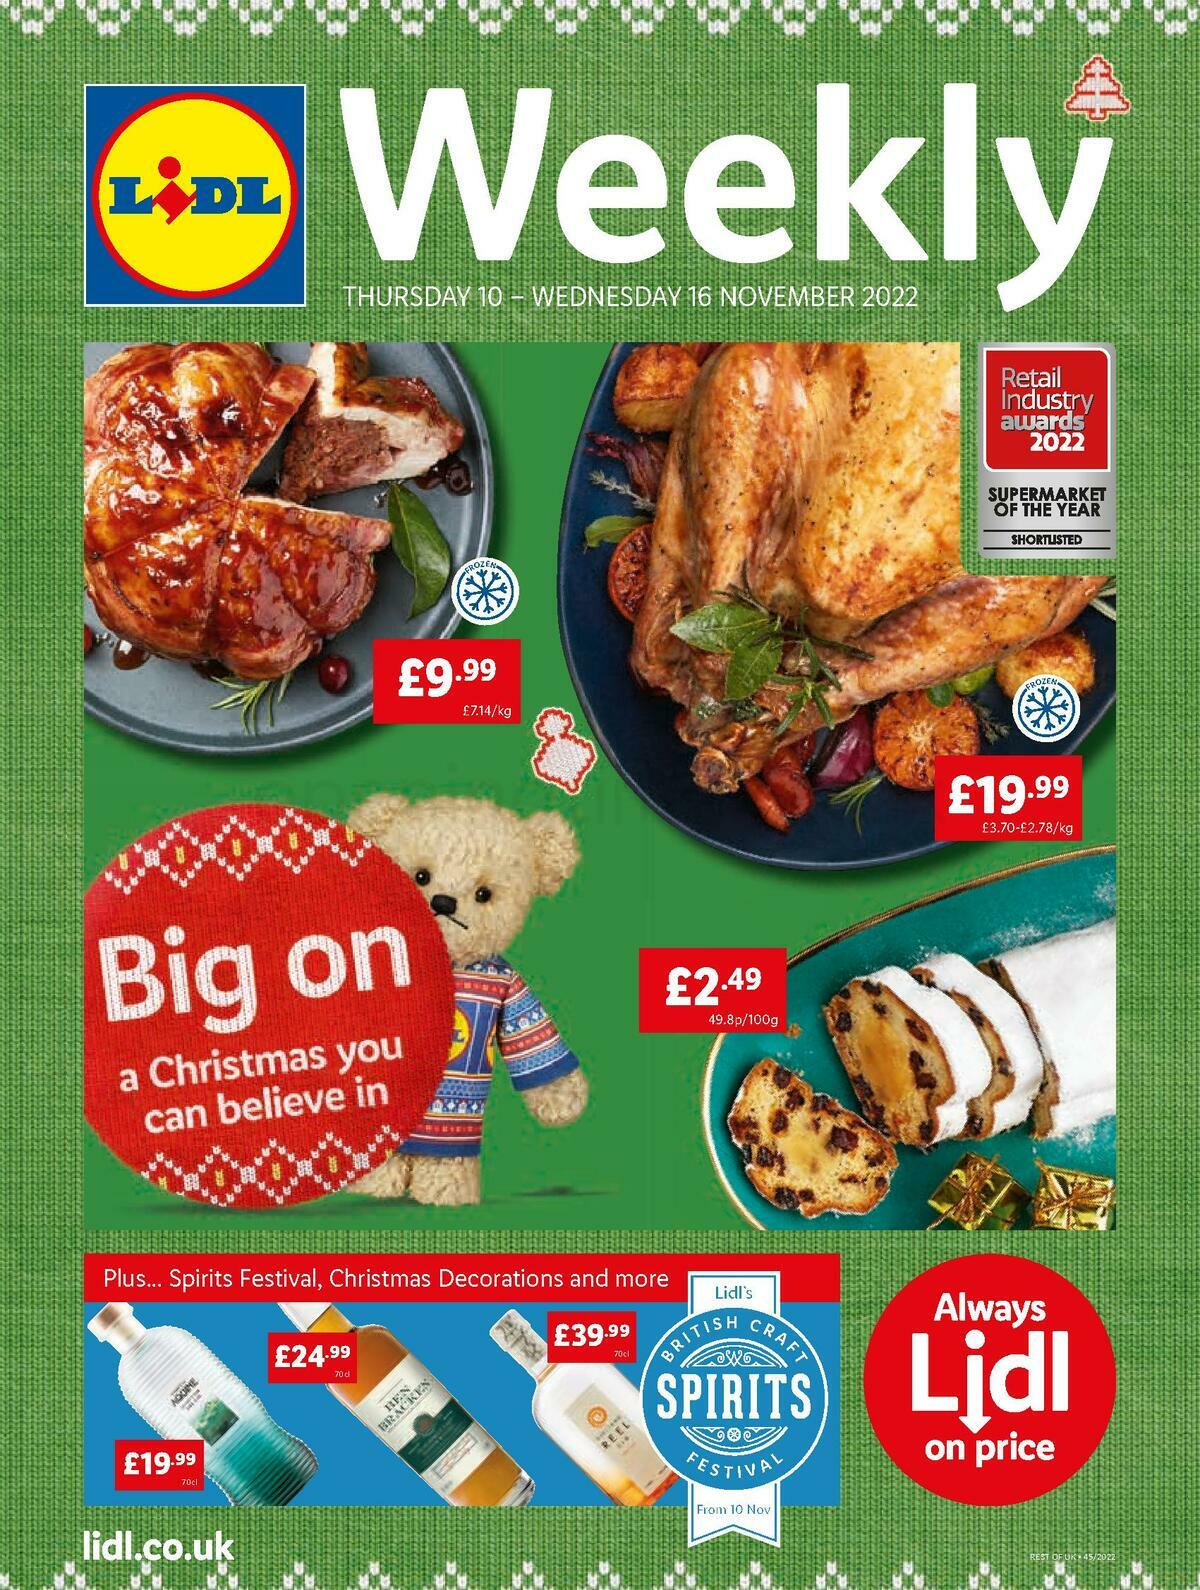 LIDL Offers from 10 November